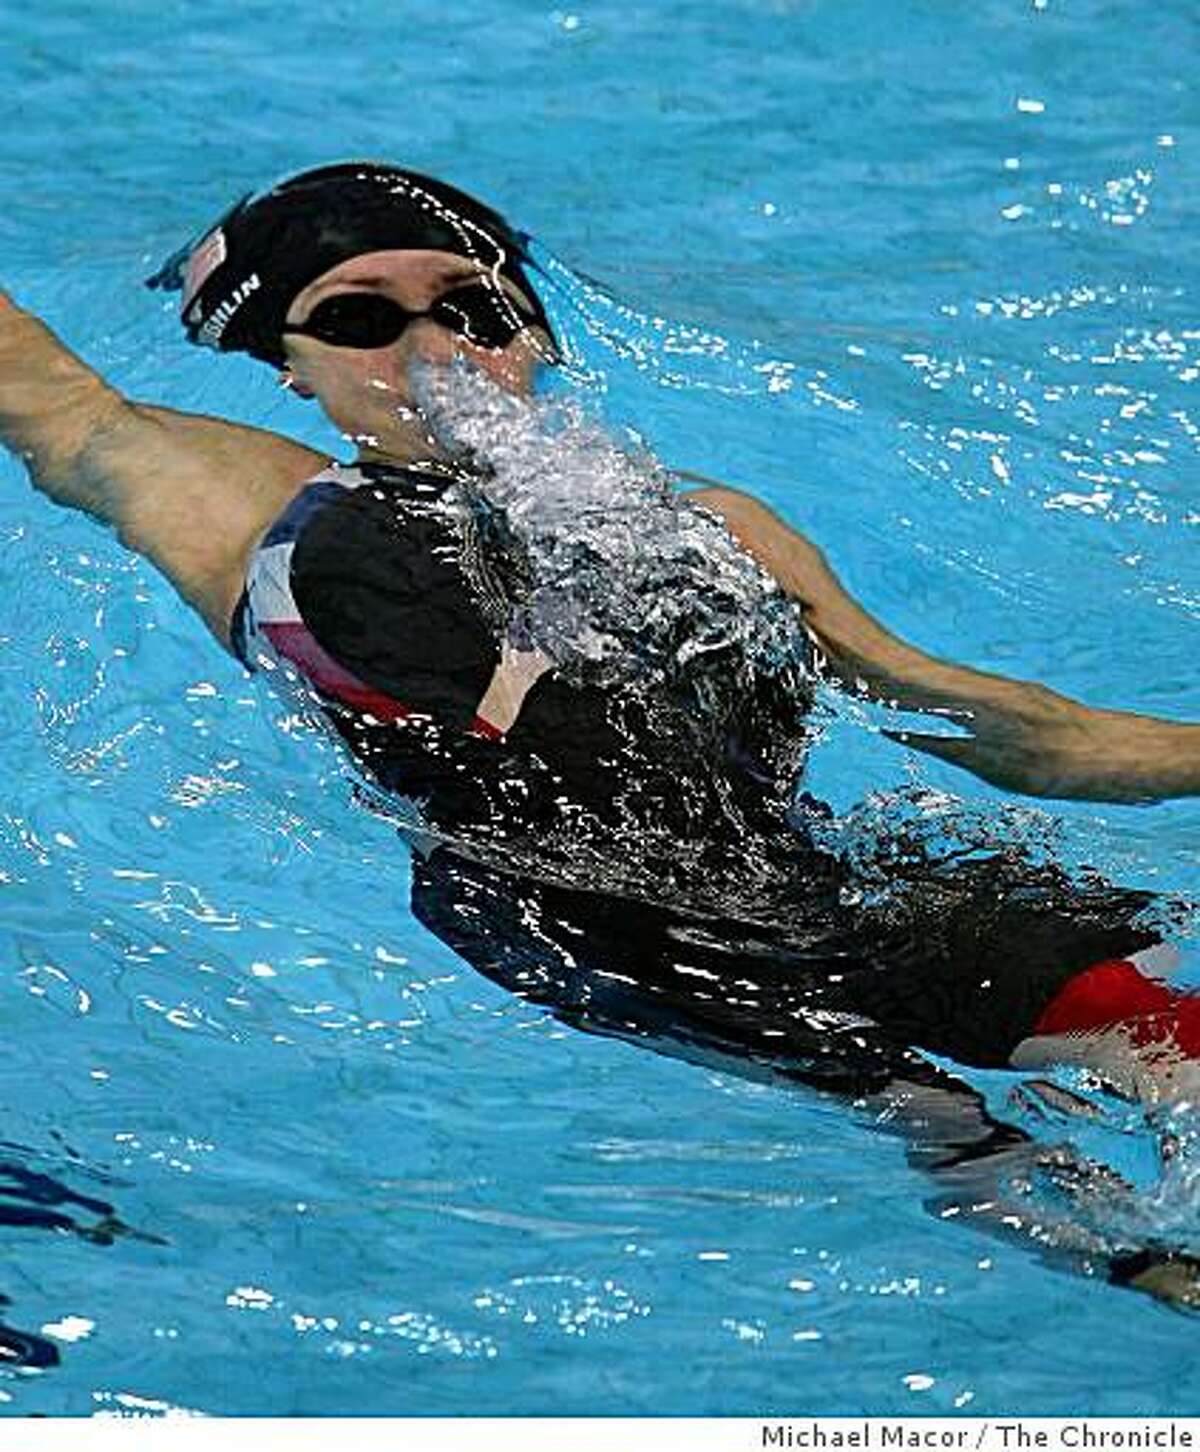 USA's Natalie Coughlin swims the semi-finals in the 100 meter backstroke to advance, during the 2008 Olympic Games, Monday Aug. 11, 2008 in Beijing, China.